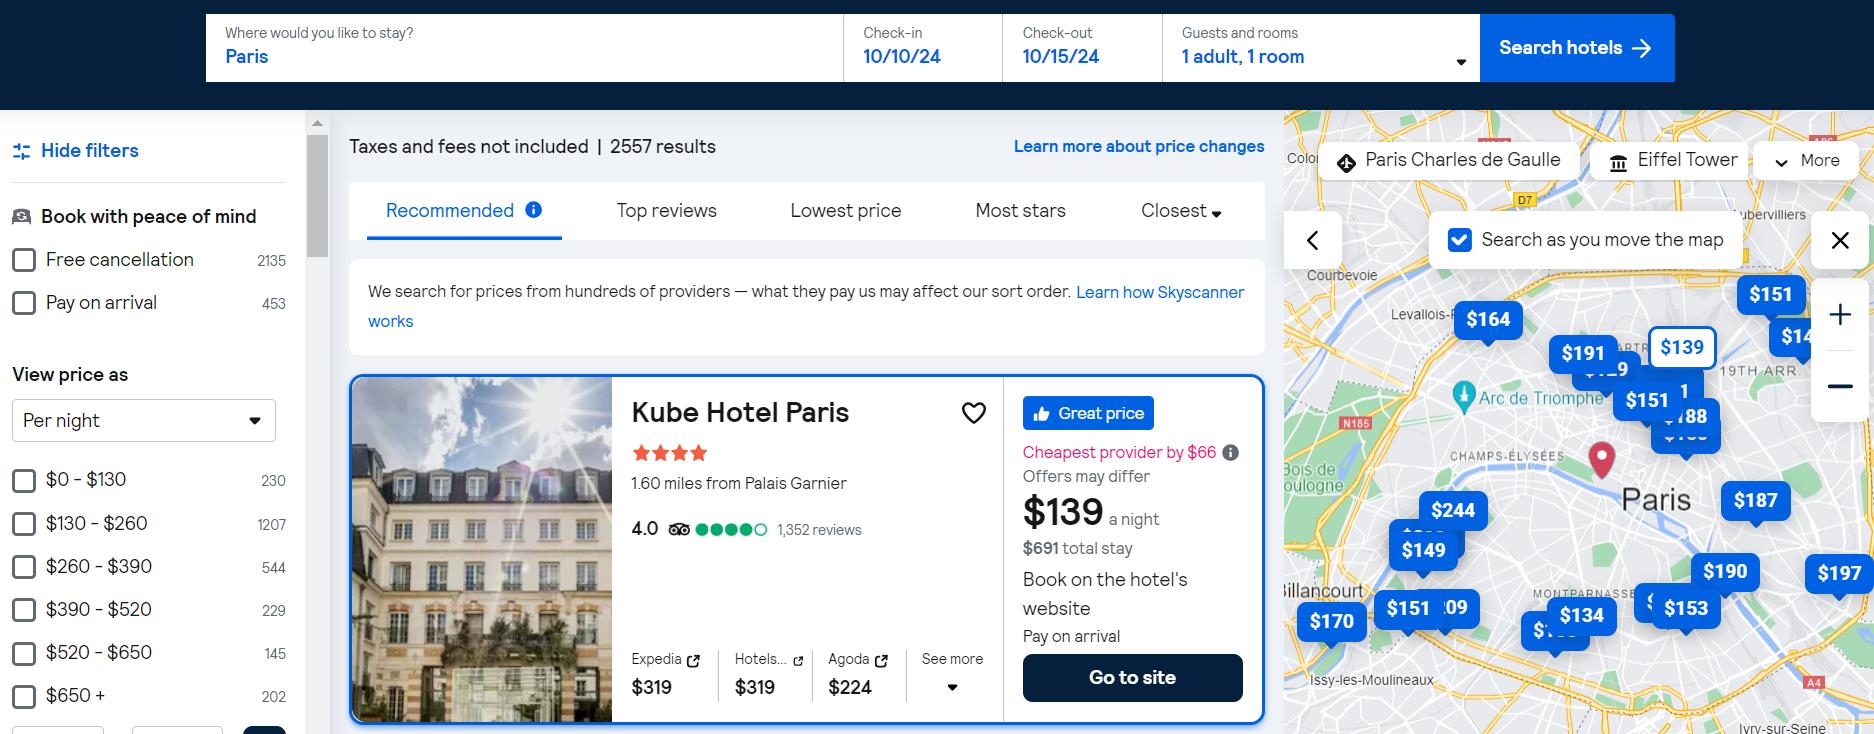 Skyscanner hotel search function with a map and list of hotels in Paris, with pricing and amenities listed